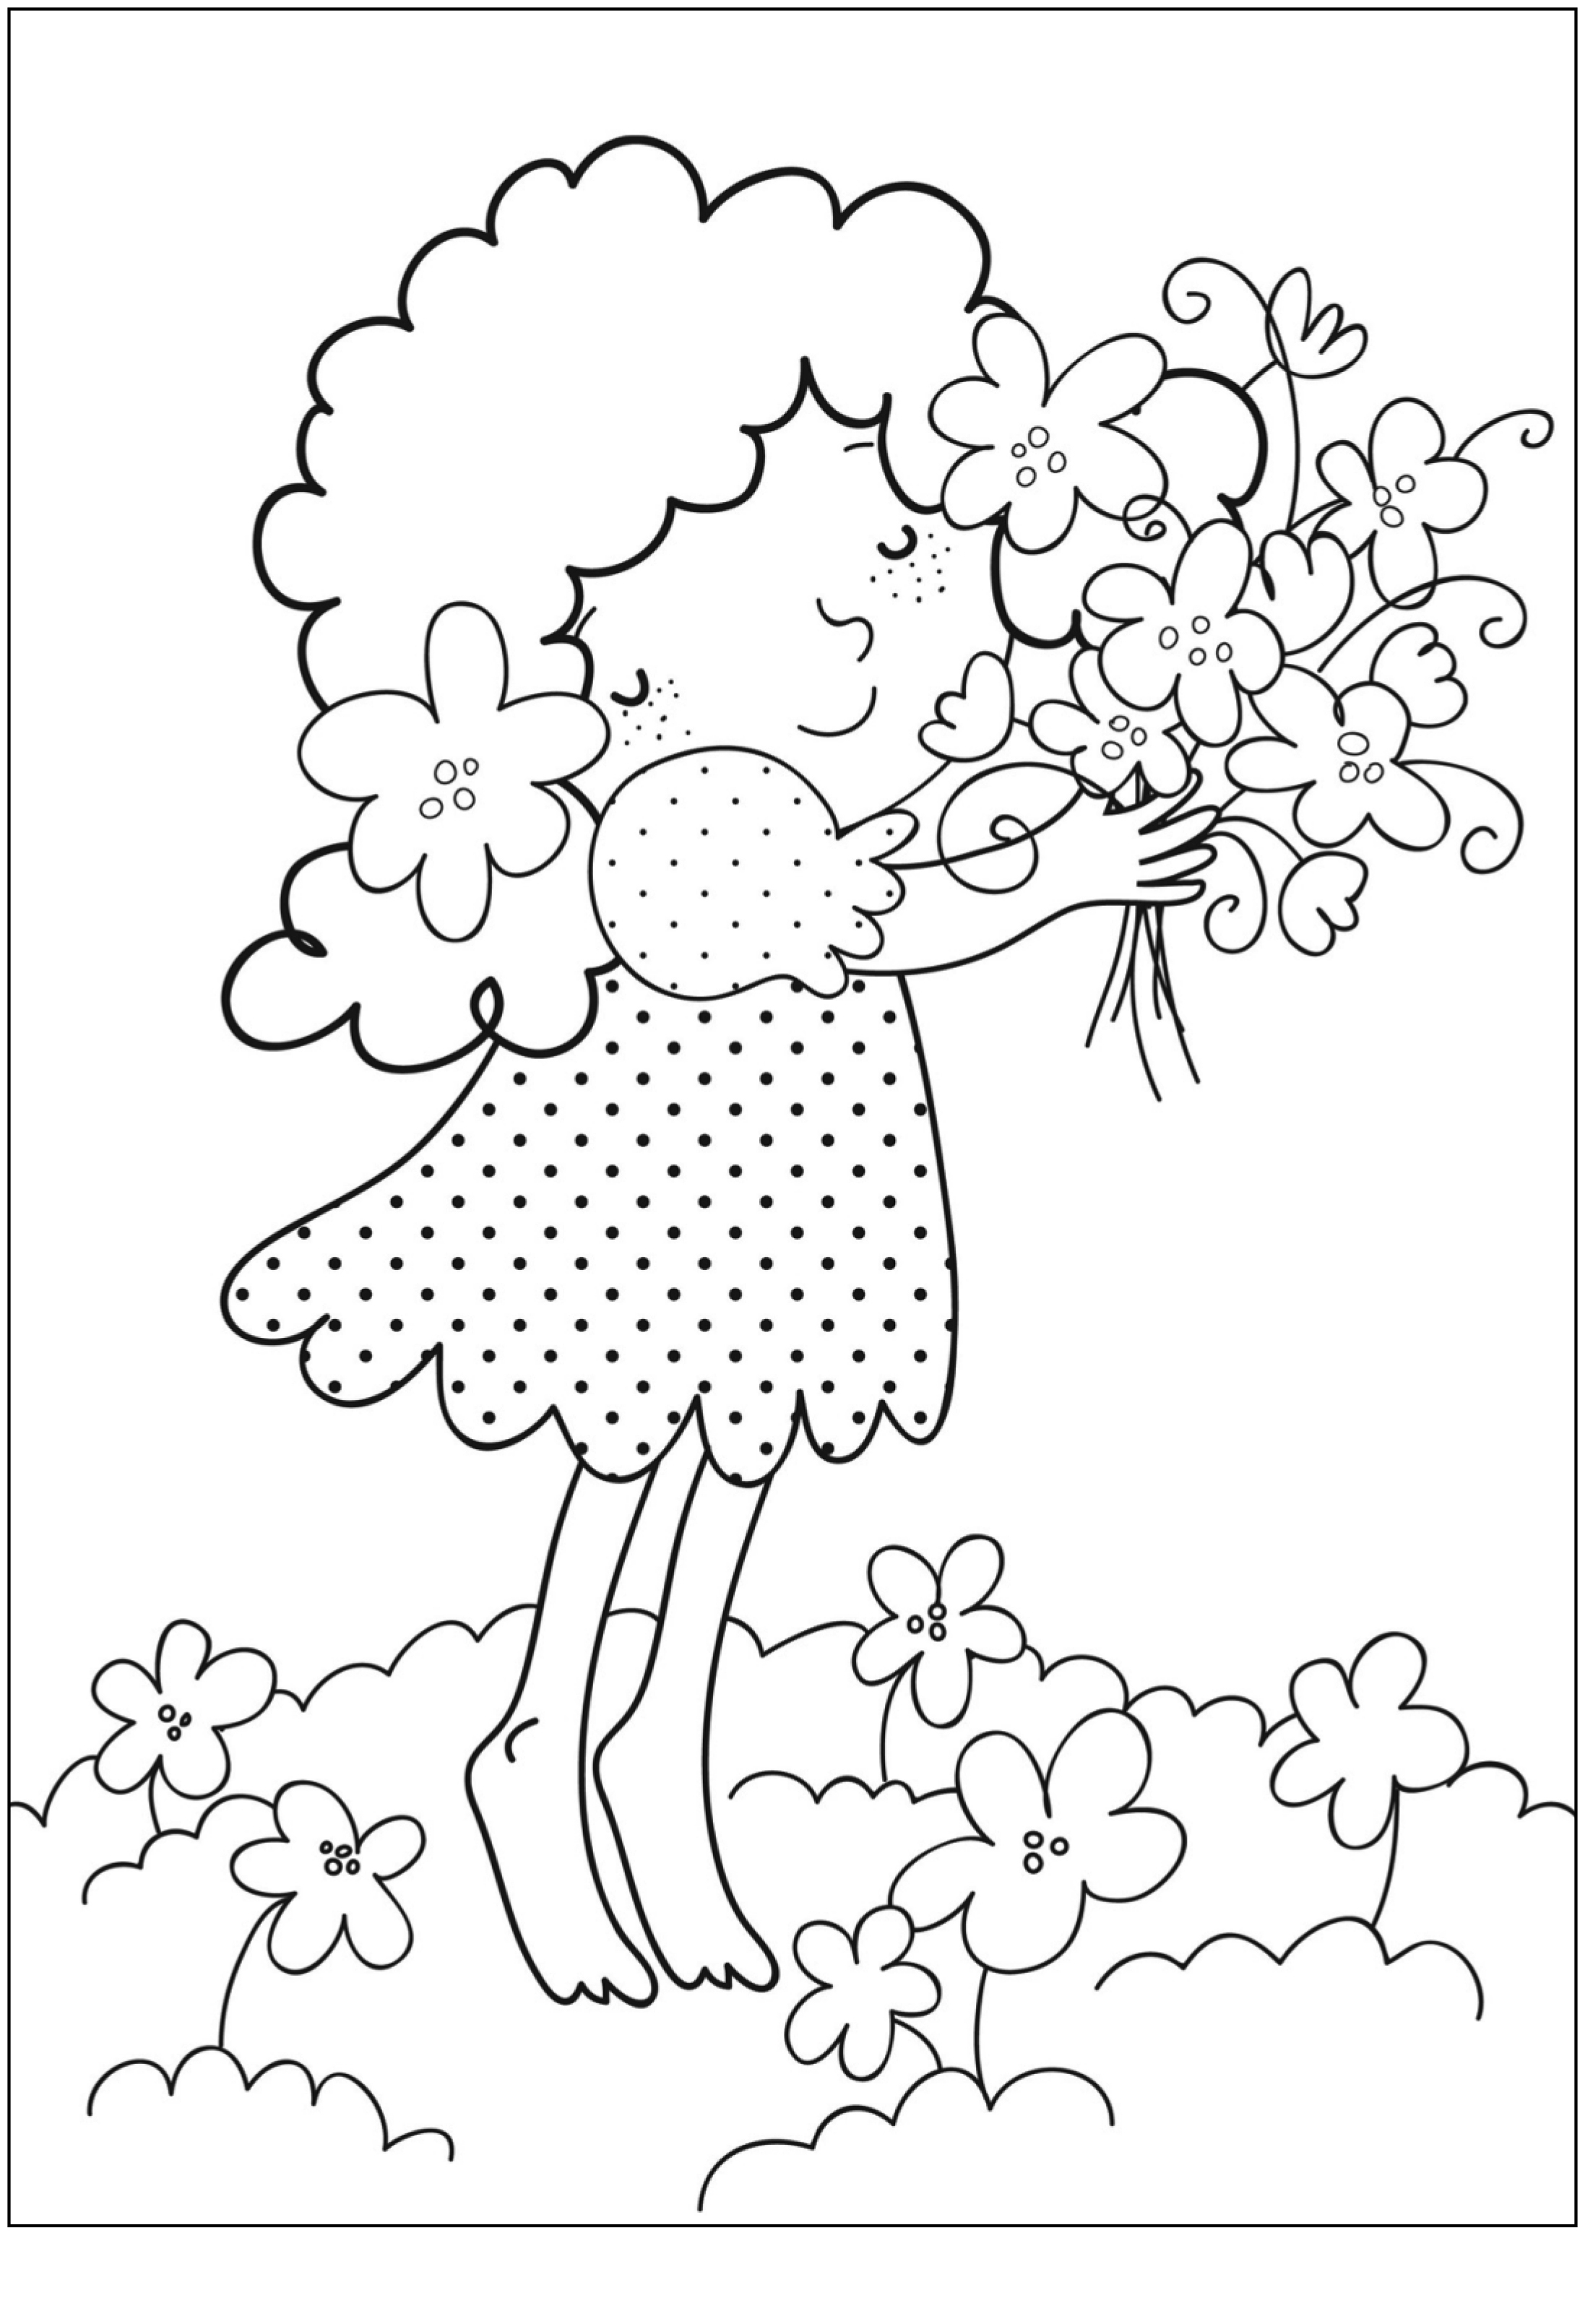 Bouquet Of Flowers Coloring Page Free Printable Flower Coloring Pages For Kids Best Coloring Pages